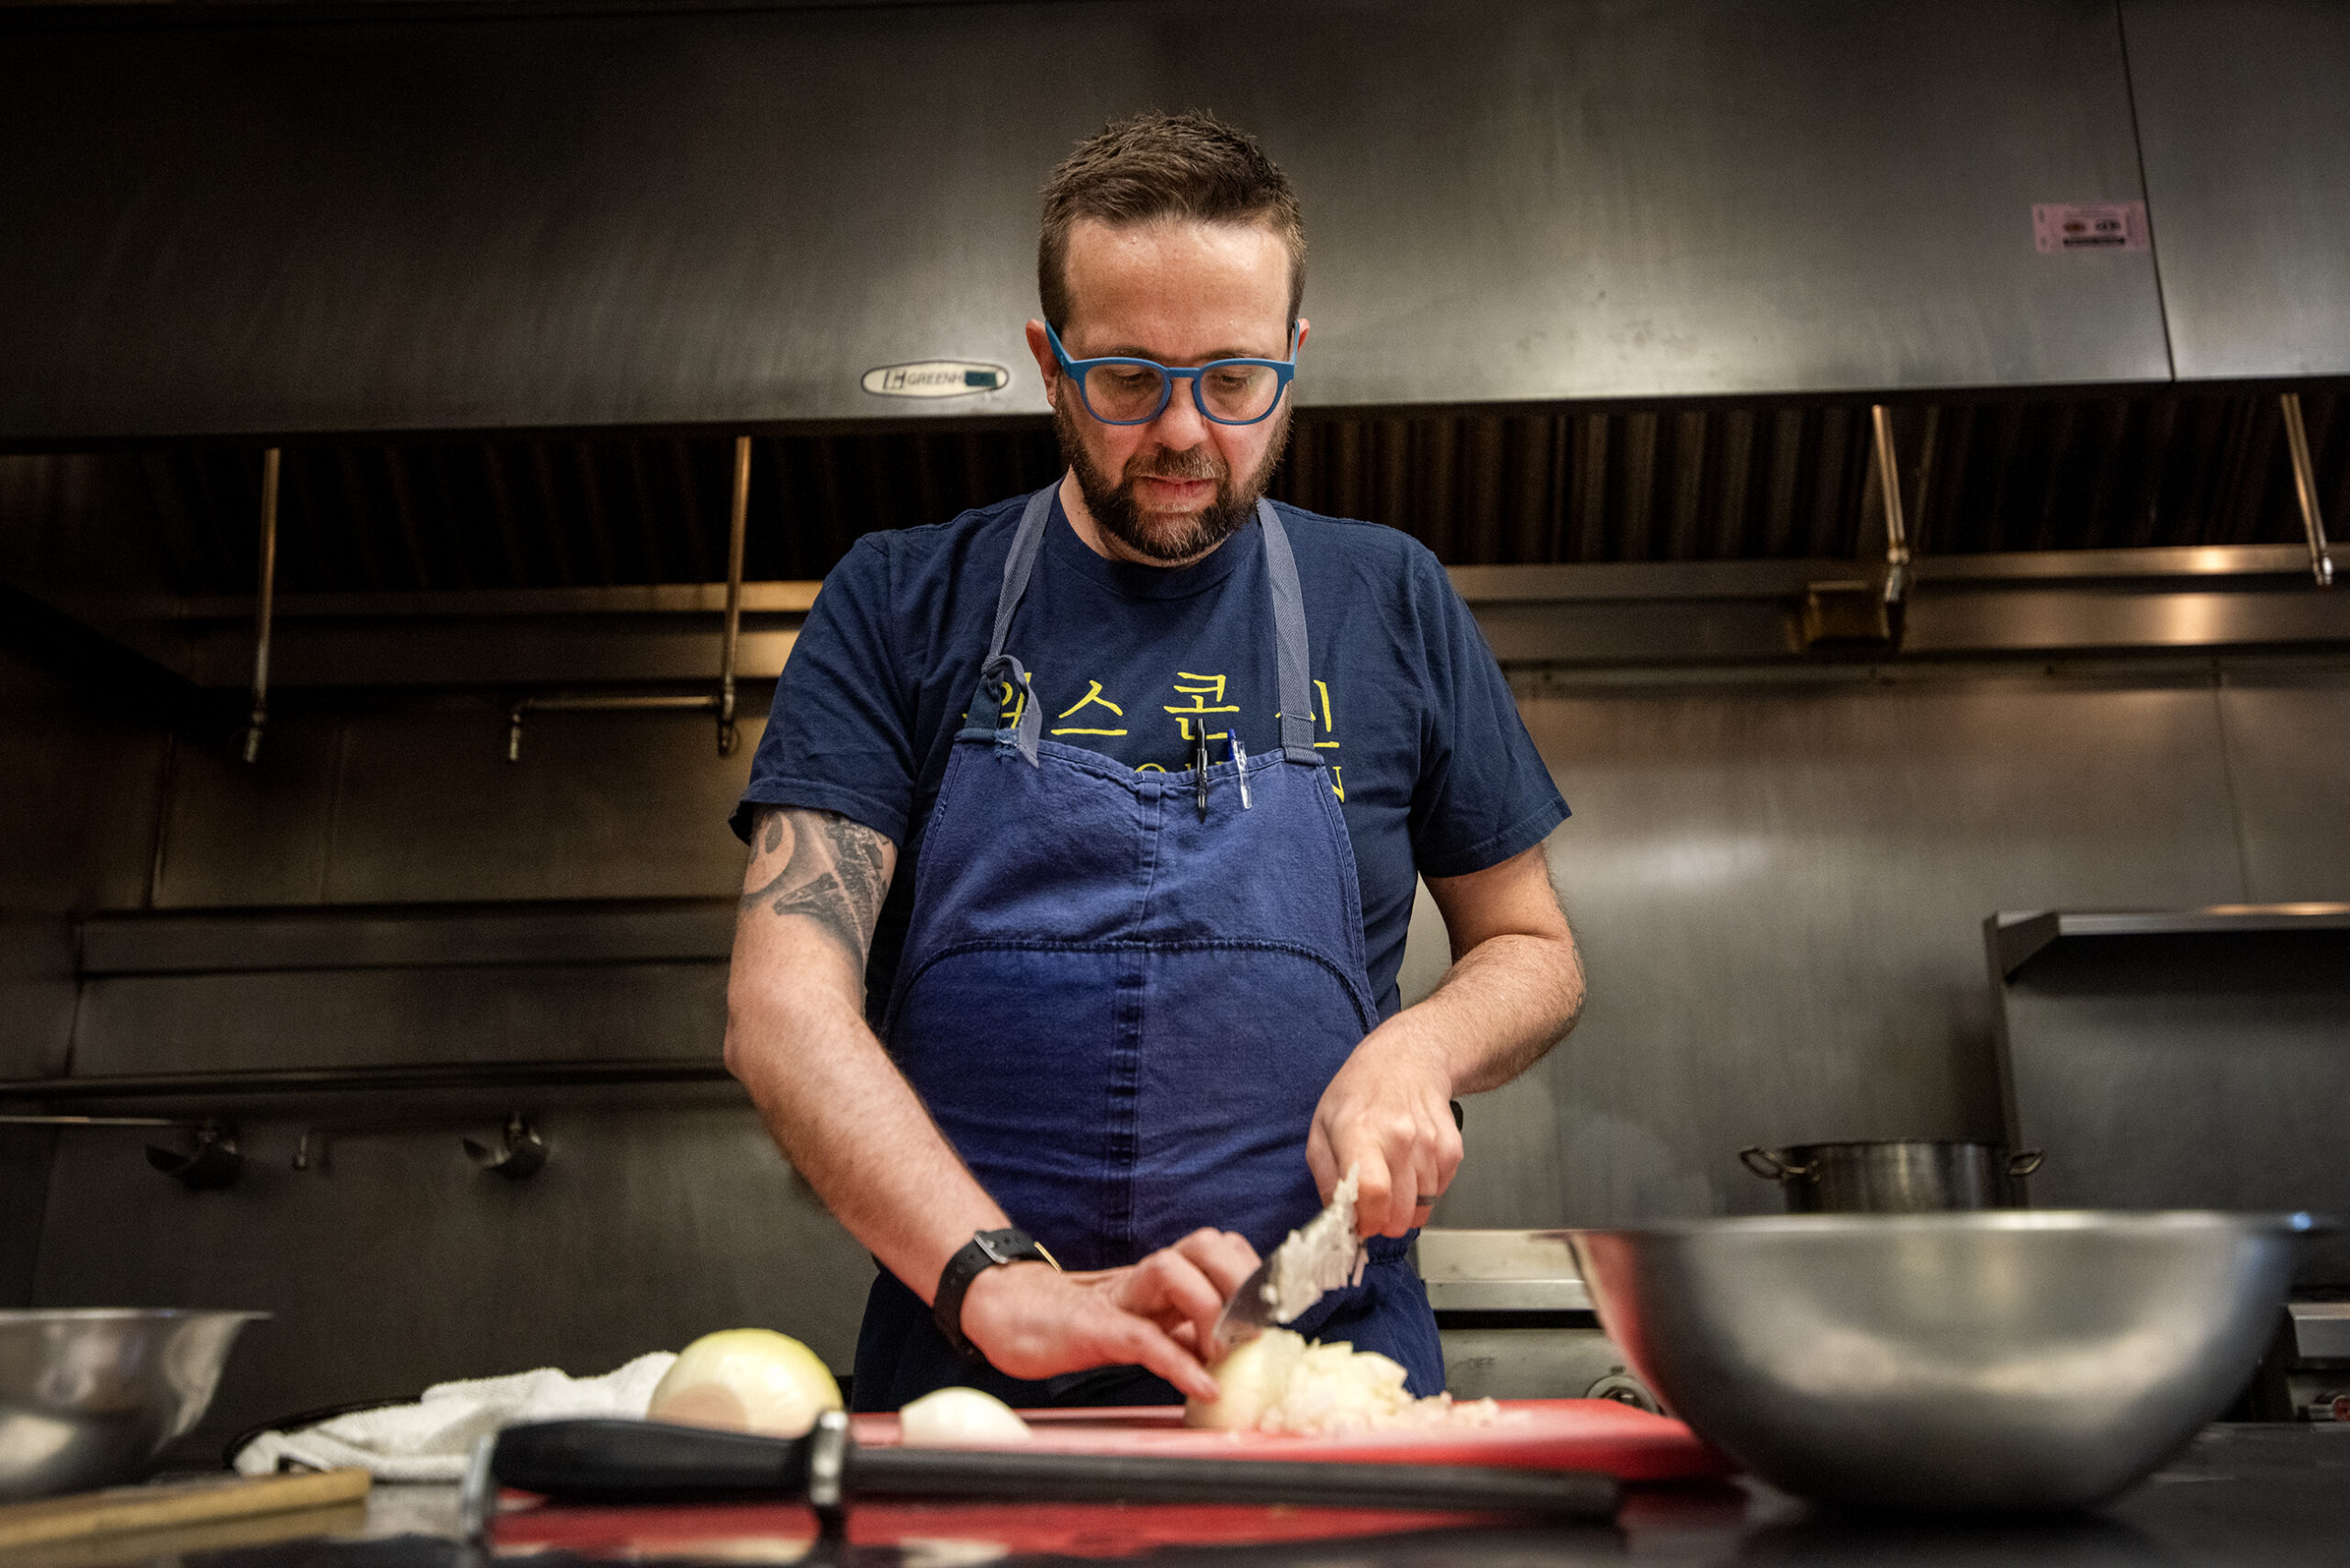 Milwaukee chef competes on upcoming season of ‘Top Chef’